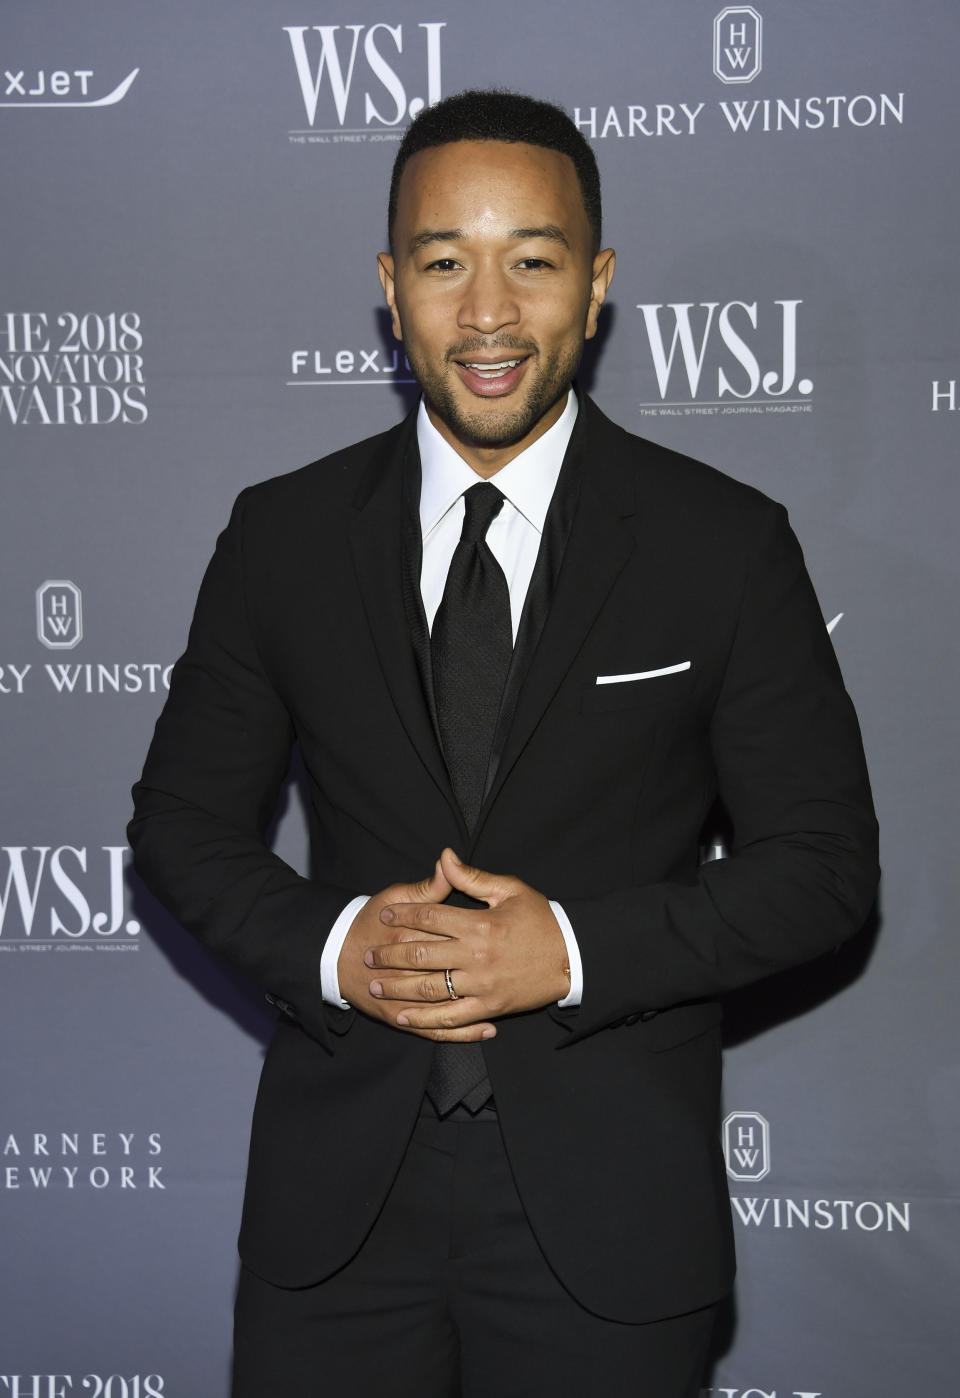 FILE - In this Nov. 7, 2018 file photo, honoree John Legend attends the WSJ Magazine 2018 Innovator Awards at the Museum of Modern Art in New York. The Recording Academy’s Task Force on Diversity and Inclusion is a launching a new initiative announced Friday, Feb. 1, 2019, to create and expand more opportunities to female music producers and engineers. More than 200 musicians, labels and others have already pledged, including Legend, Lady Gaga, Justin Bieber, Pearl Jam, Pharrell and Ariana Grande. (Photo by Evan Agostini/Invision/AP, File)